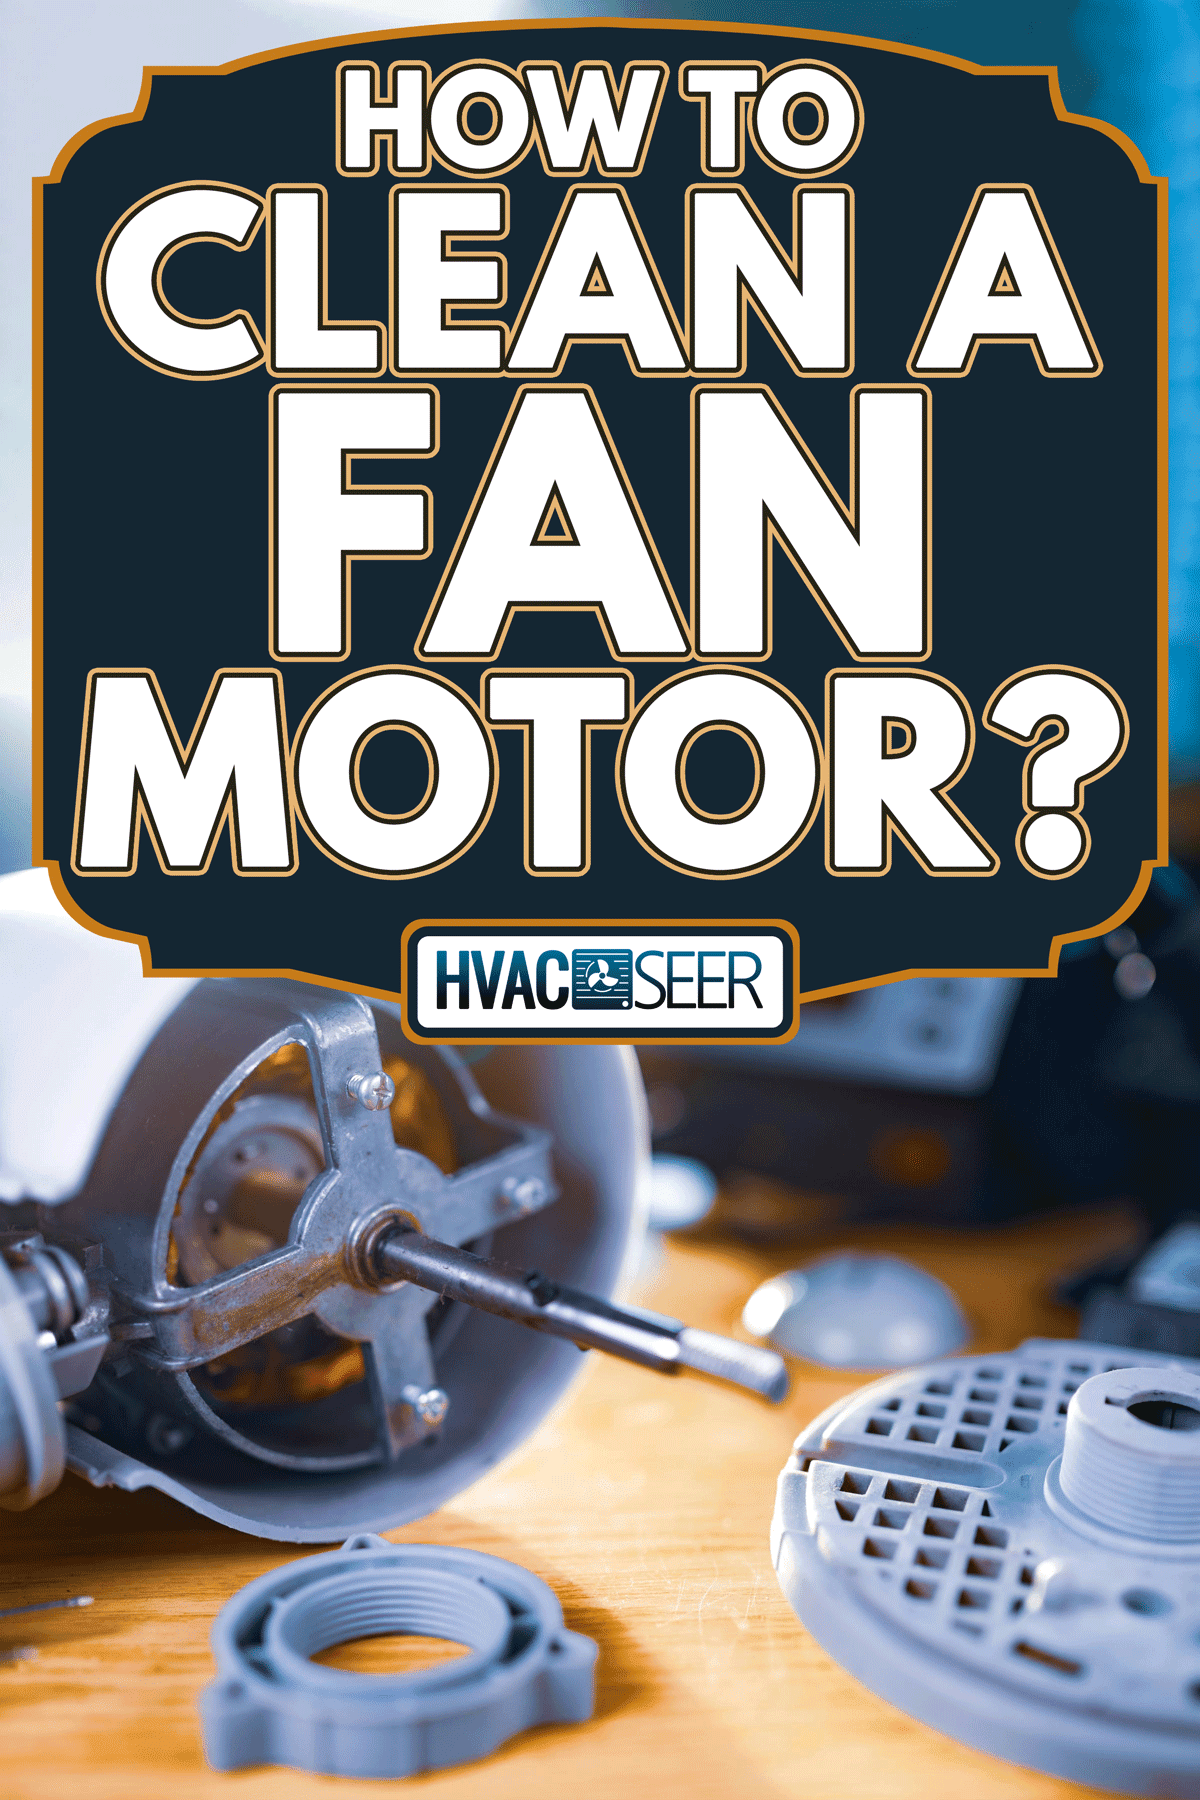 Iron motor from home cooling fan lies on a table, How To Clean A Fan Motor?